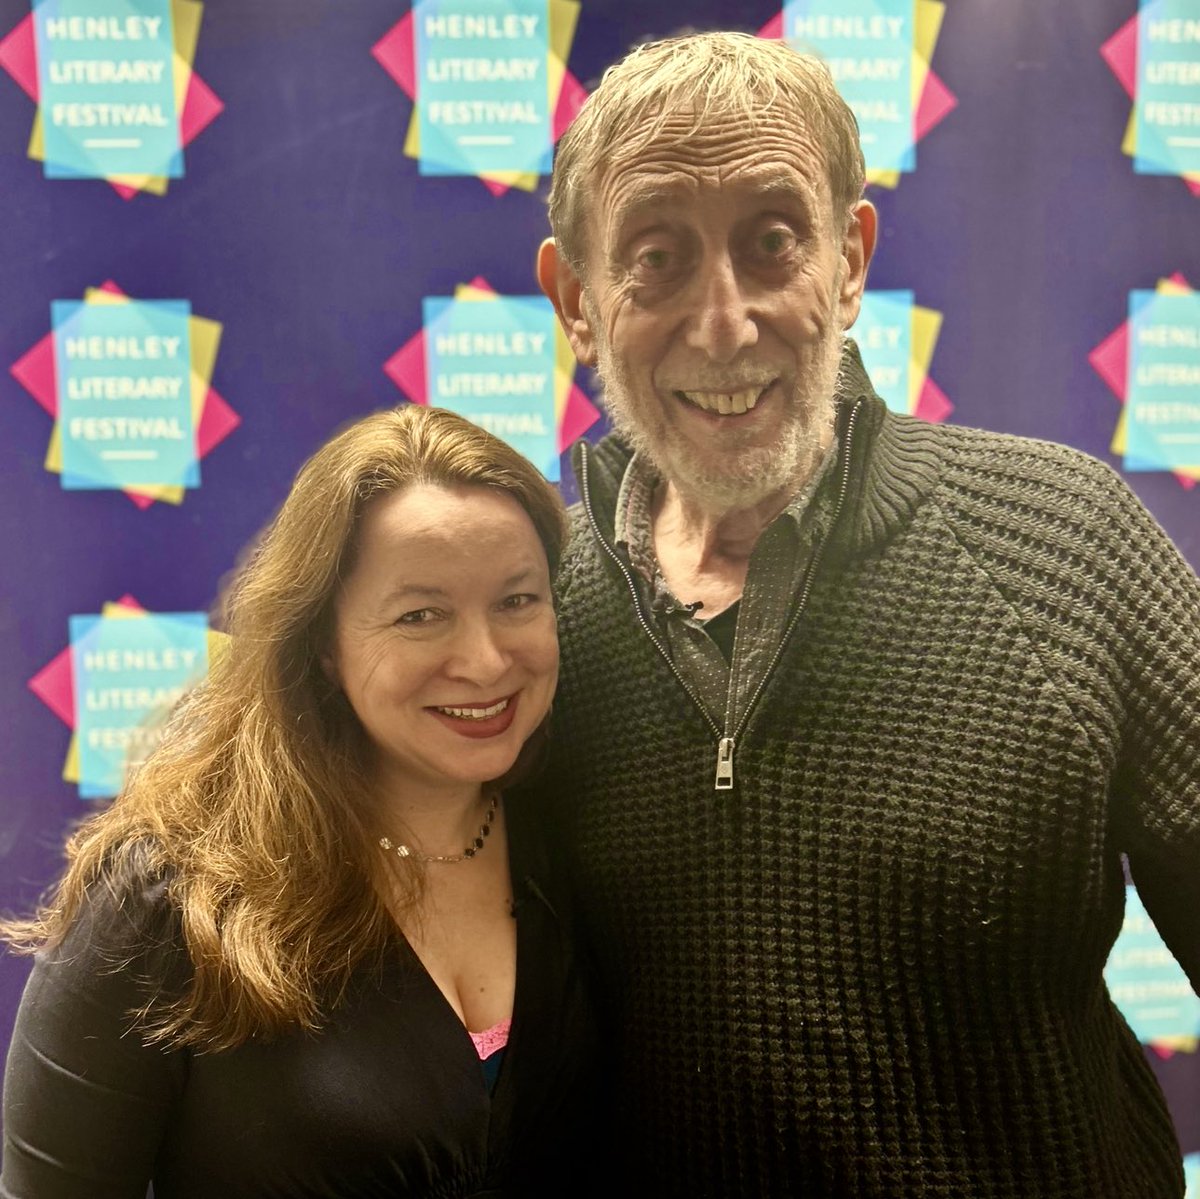 What a treat to interview the inimitable ⁦@MichaelRosenYes⁩ at ⁦@HenleyLitFest⁩ tonight. He talked so openly, generously, humanely, hilariously. GETTING BETTER is out in paperback now - a wise & wonderful read 💜